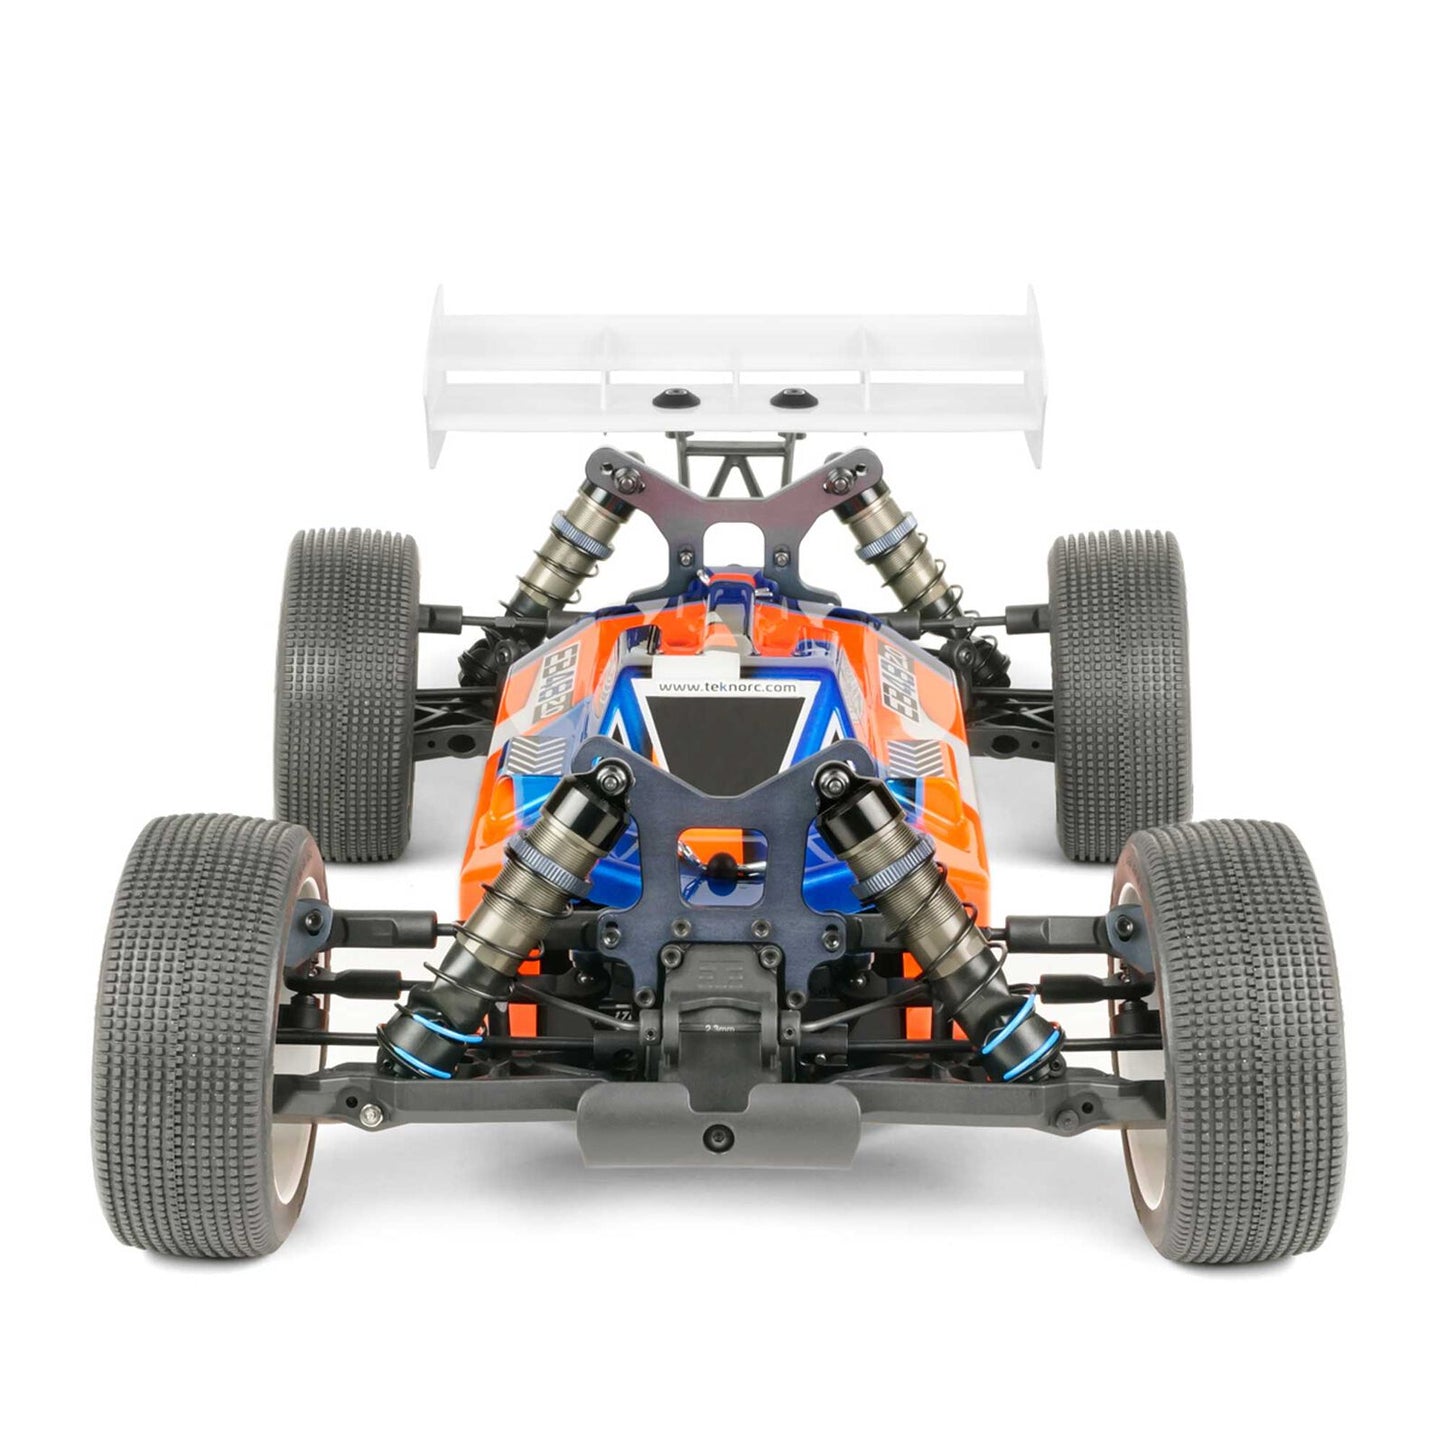 TEKNO TKR9000 1/8 EB48 2.0 4WD Competition Electric Buggy Kit